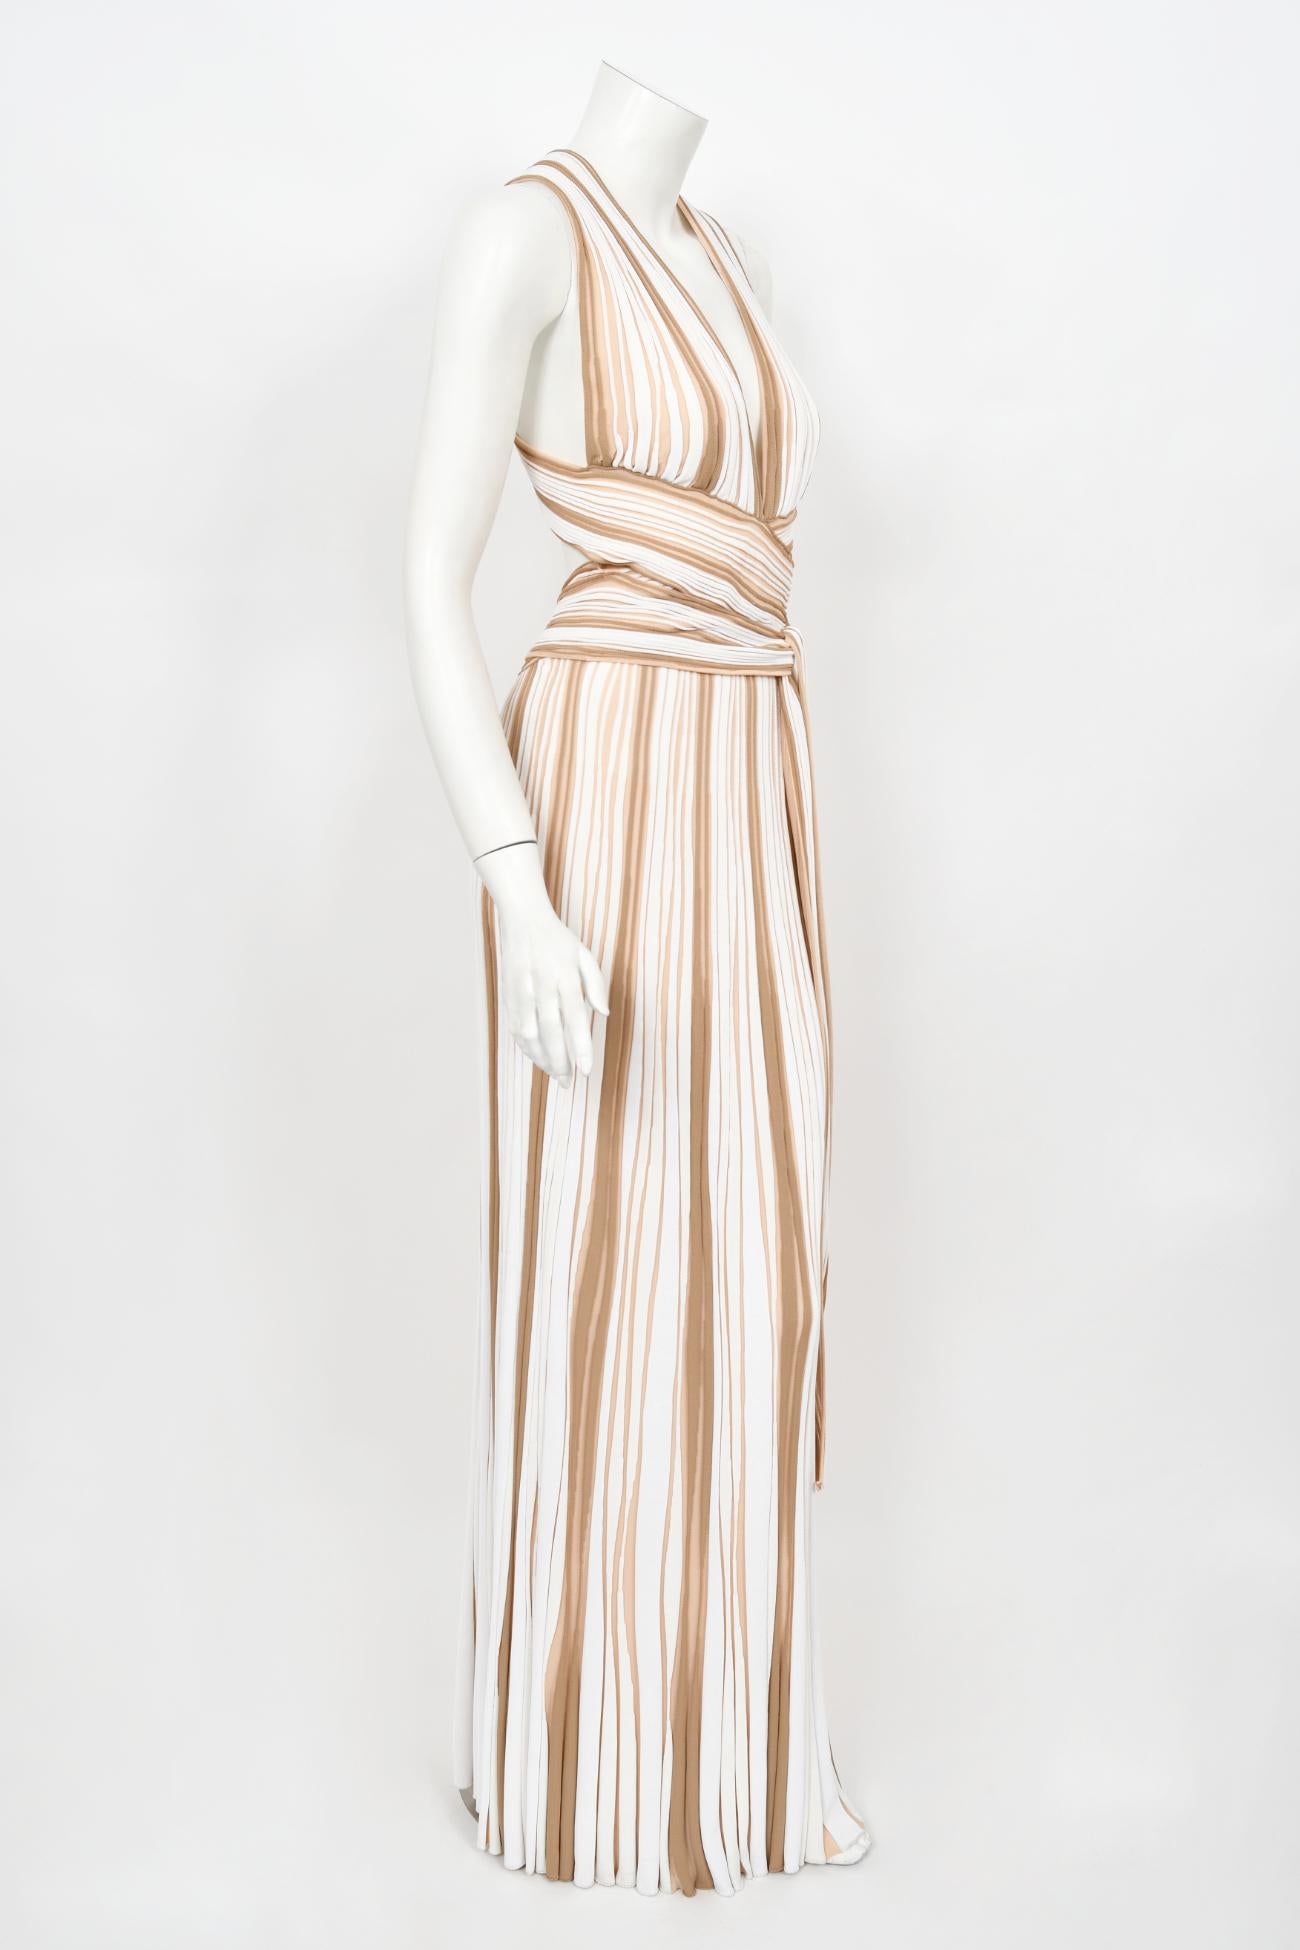 2002 Christian Dior by John Galliano Striped Stretch Knit Low-Plunge Maxi Dress For Sale 8